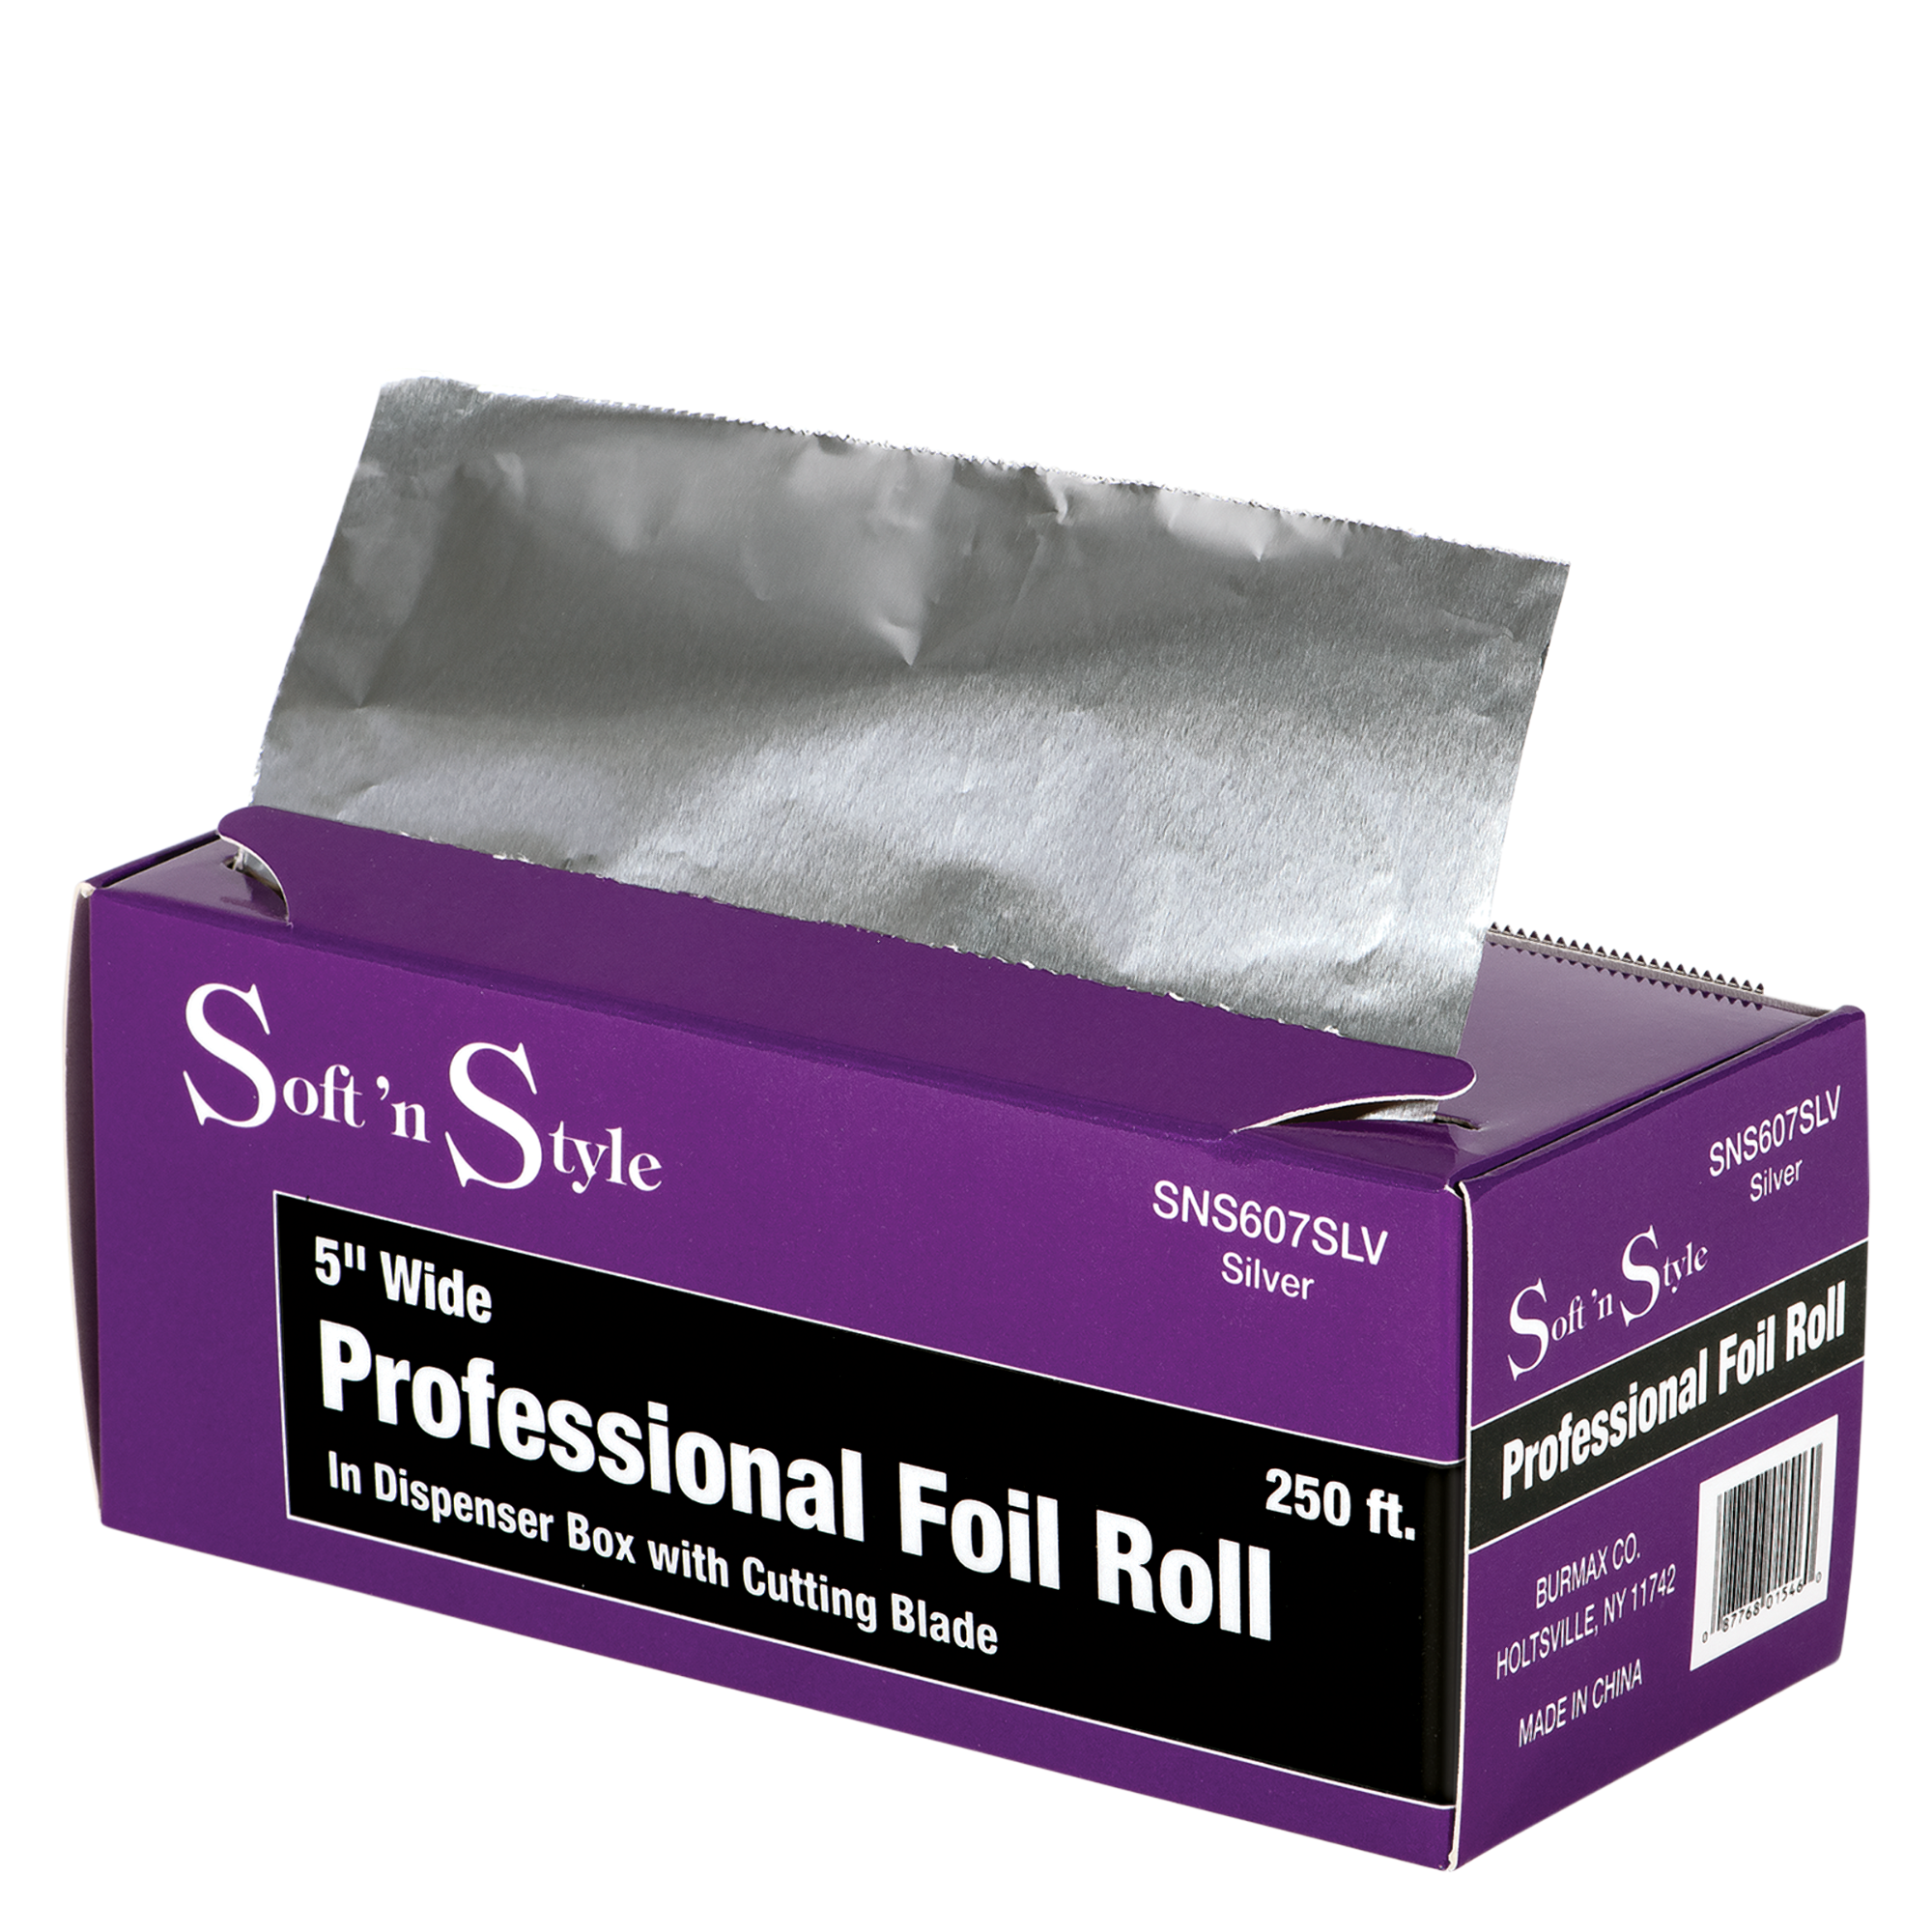 5" x 250' Professional Smooth Foil Roll